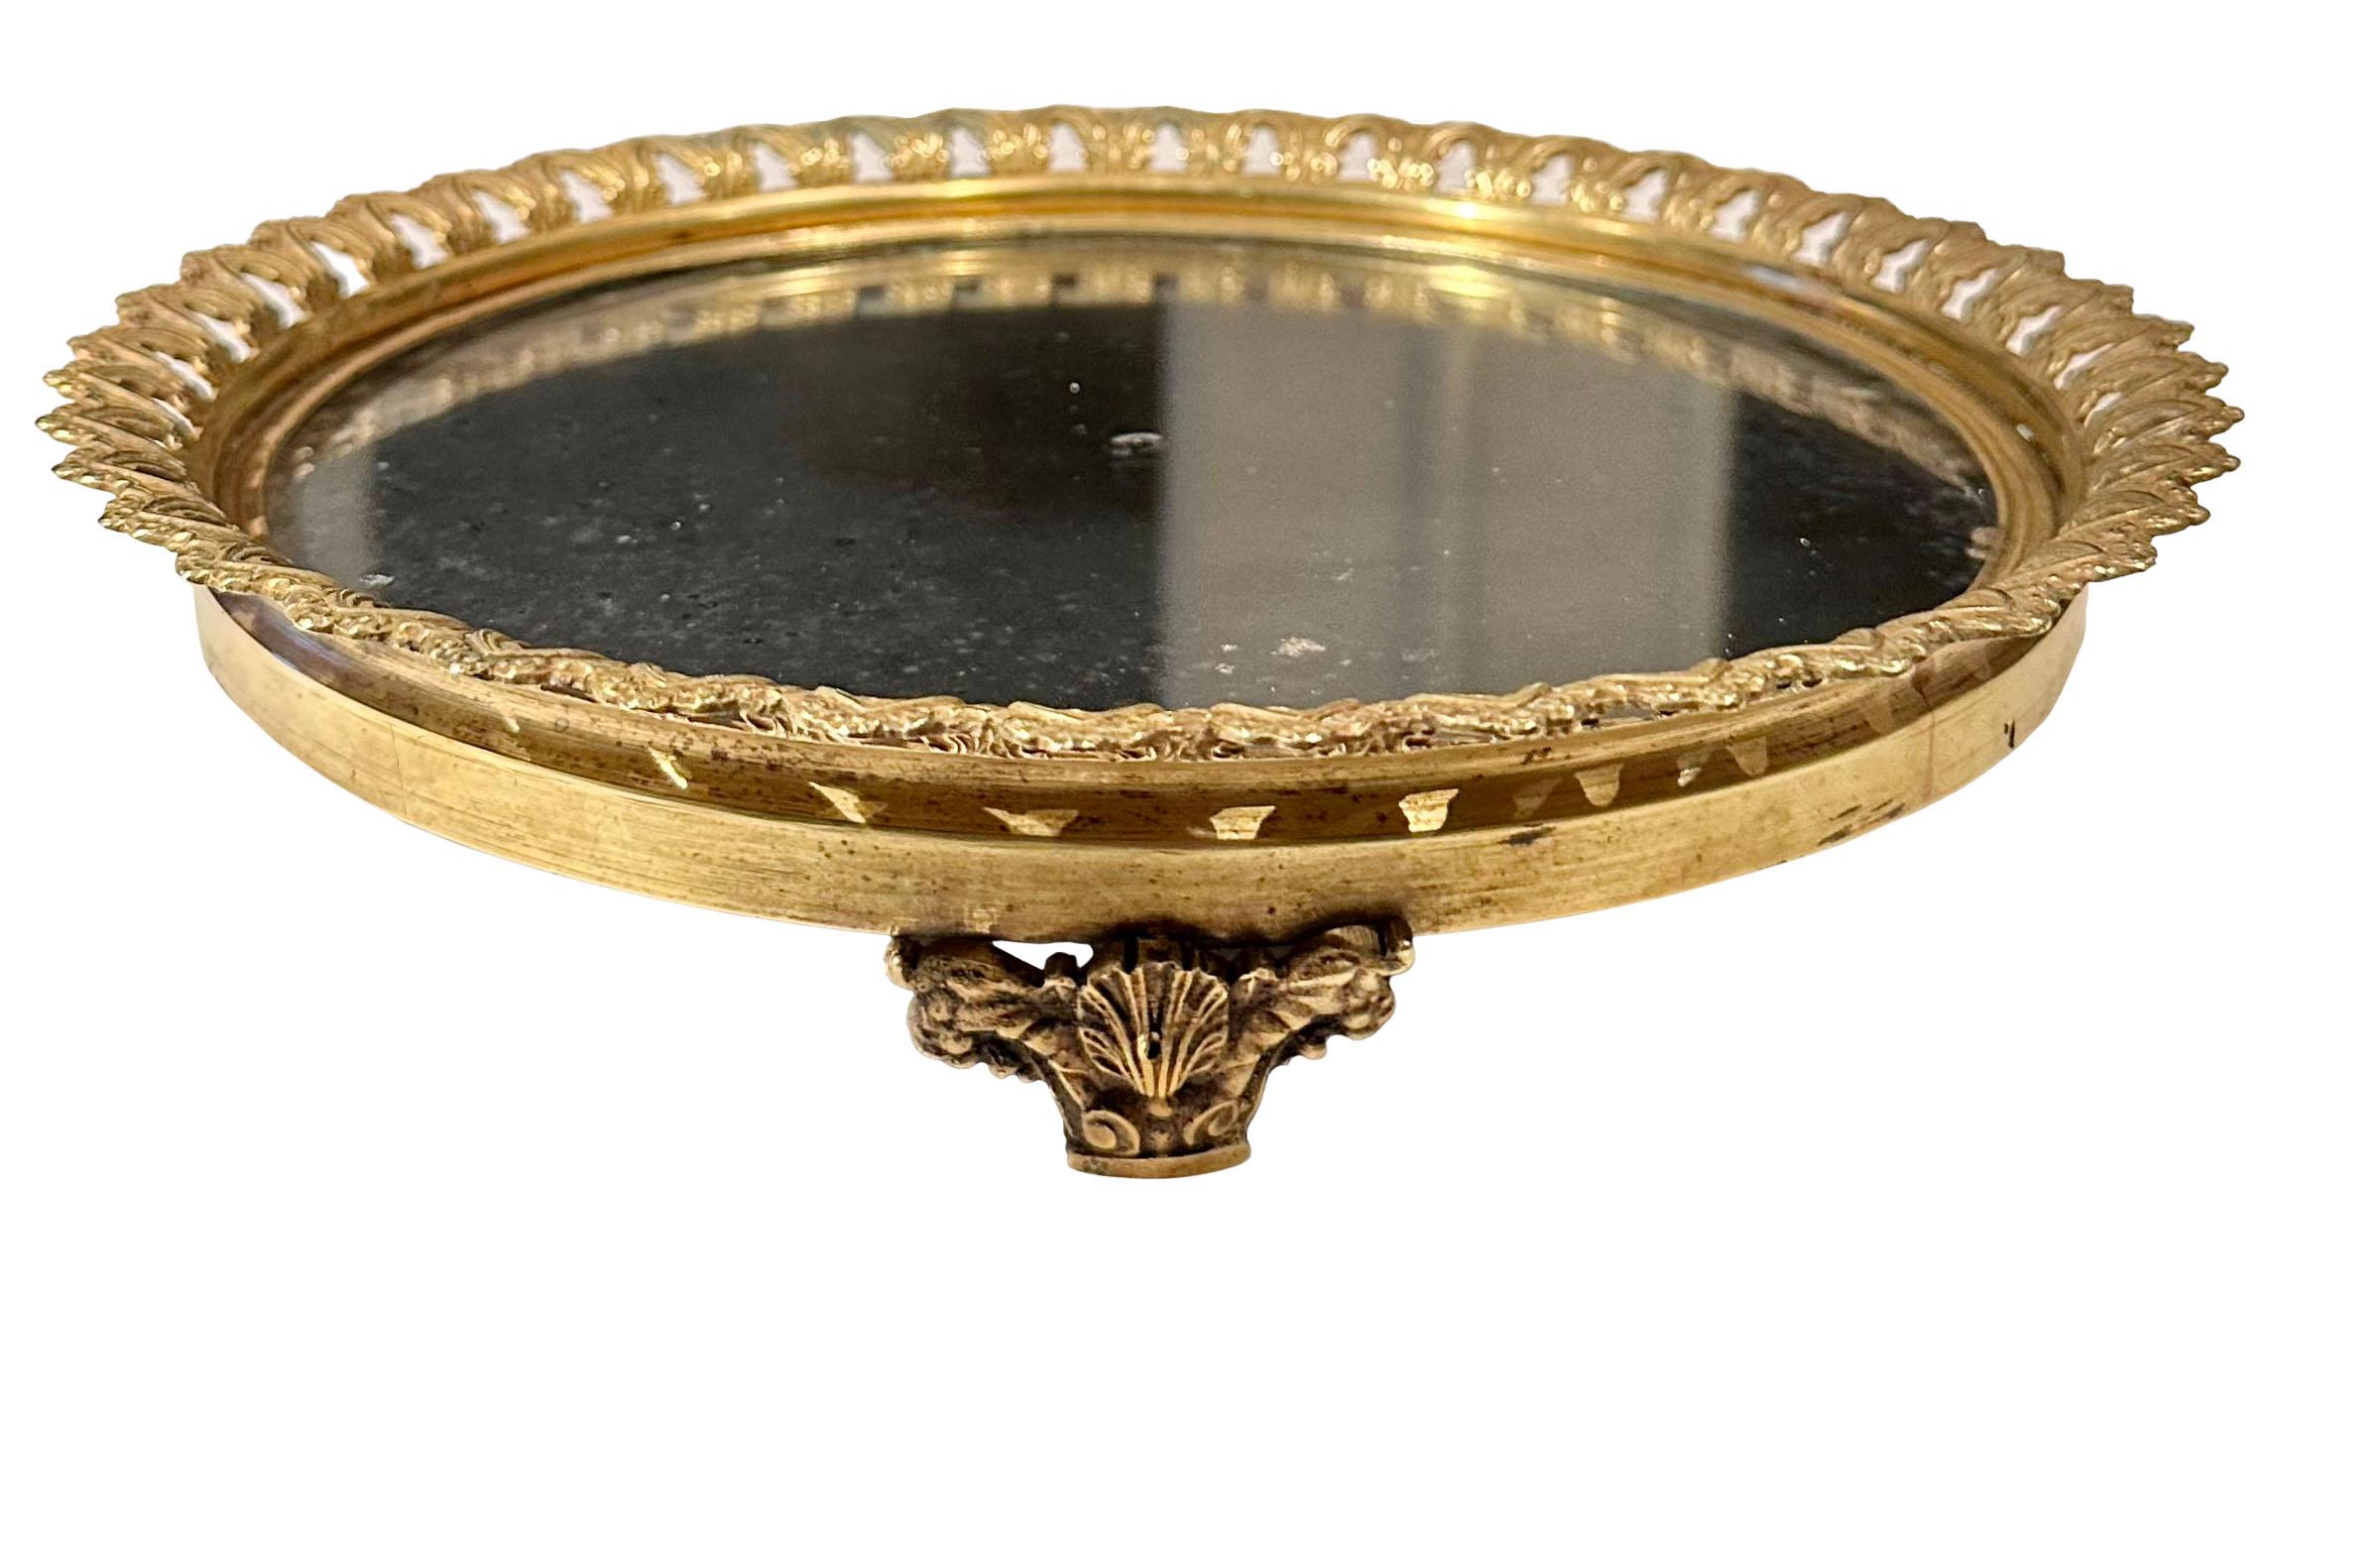 An early 19th century French neoclassical plateau with original glass and dore bronze with a beautiful reticulated edge and three shell feet surrounded by garlands. The mirror its self measure nine inches.